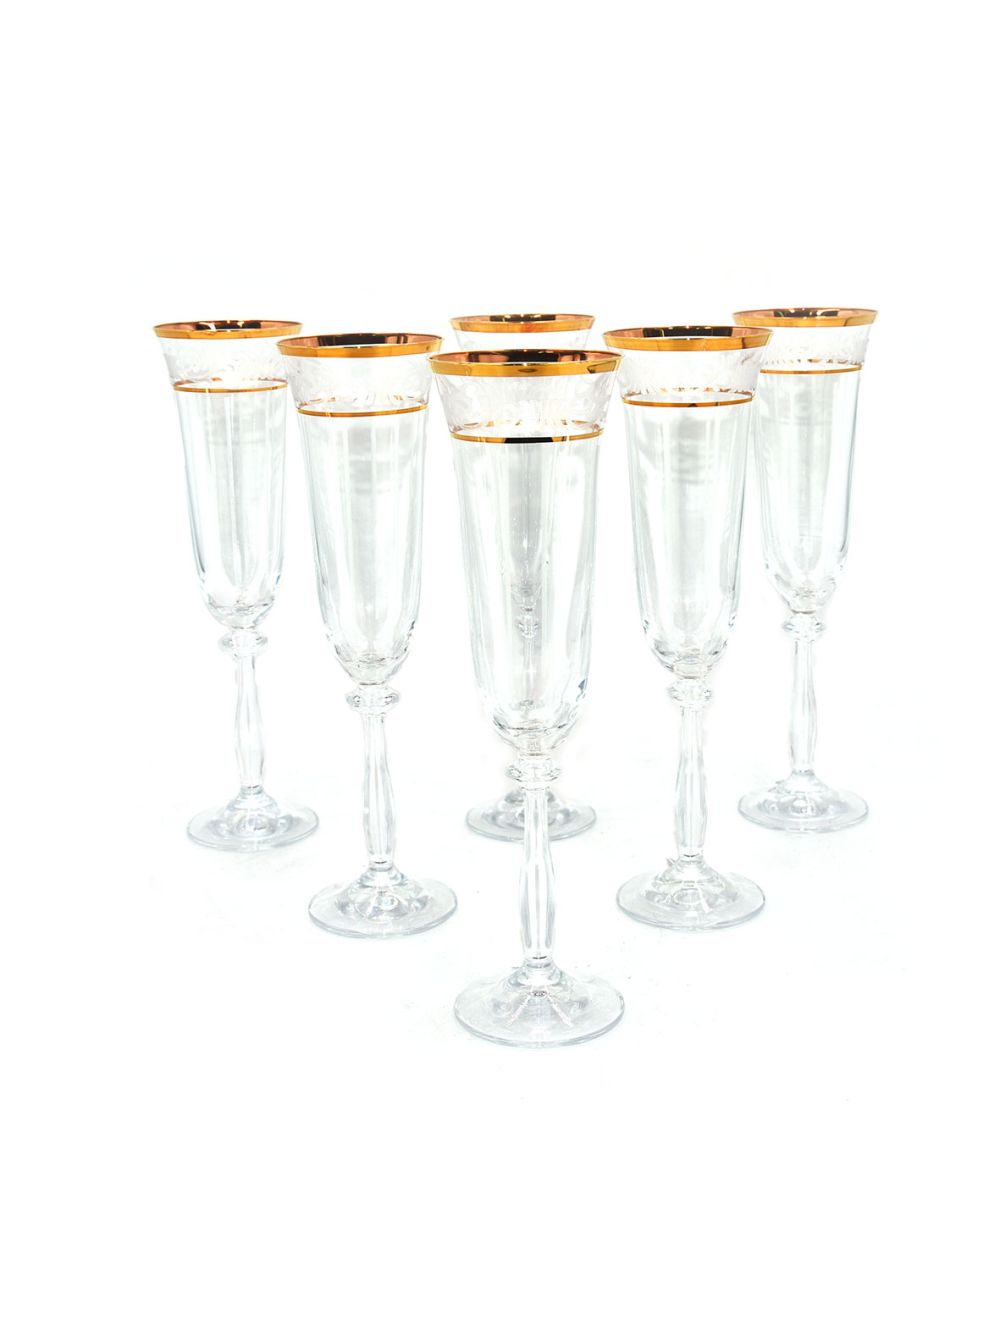 Bohemia 6 Pieces Gold Plated 190 ml Flute Glass